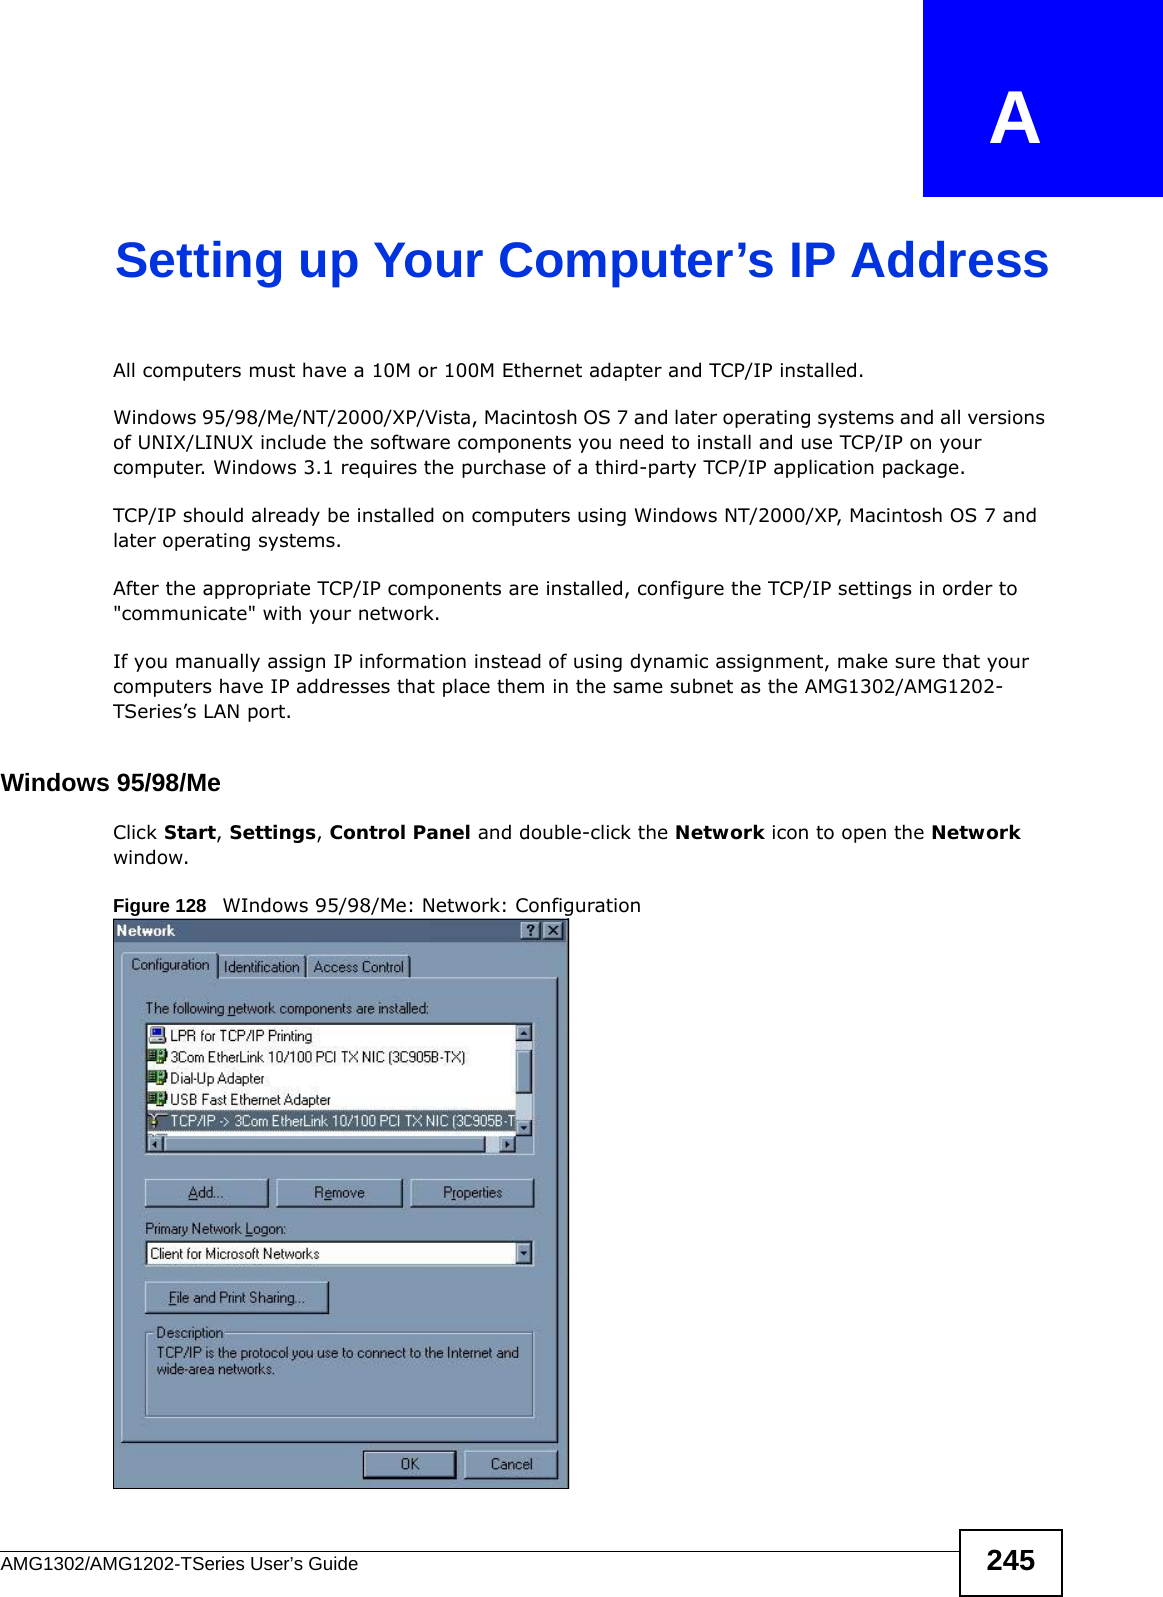 AMG1302/AMG1202-TSeries User’s Guide 245APPENDIX   ASetting up Your Computer’s IP AddressAll computers must have a 10M or 100M Ethernet adapter and TCP/IP installed. Windows 95/98/Me/NT/2000/XP/Vista, Macintosh OS 7 and later operating systems and all versions of UNIX/LINUX include the software components you need to install and use TCP/IP on your computer. Windows 3.1 requires the purchase of a third-party TCP/IP application package.TCP/IP should already be installed on computers using Windows NT/2000/XP, Macintosh OS 7 and later operating systems.After the appropriate TCP/IP components are installed, configure the TCP/IP settings in order to &quot;communicate&quot; with your network. If you manually assign IP information instead of using dynamic assignment, make sure that your computers have IP addresses that place them in the same subnet as the AMG1302/AMG1202-TSeries’s LAN port.Windows 95/98/MeClick Start, Settings, Control Panel and double-click the Network icon to open the Network window.Figure 128   WIndows 95/98/Me: Network: Configuration